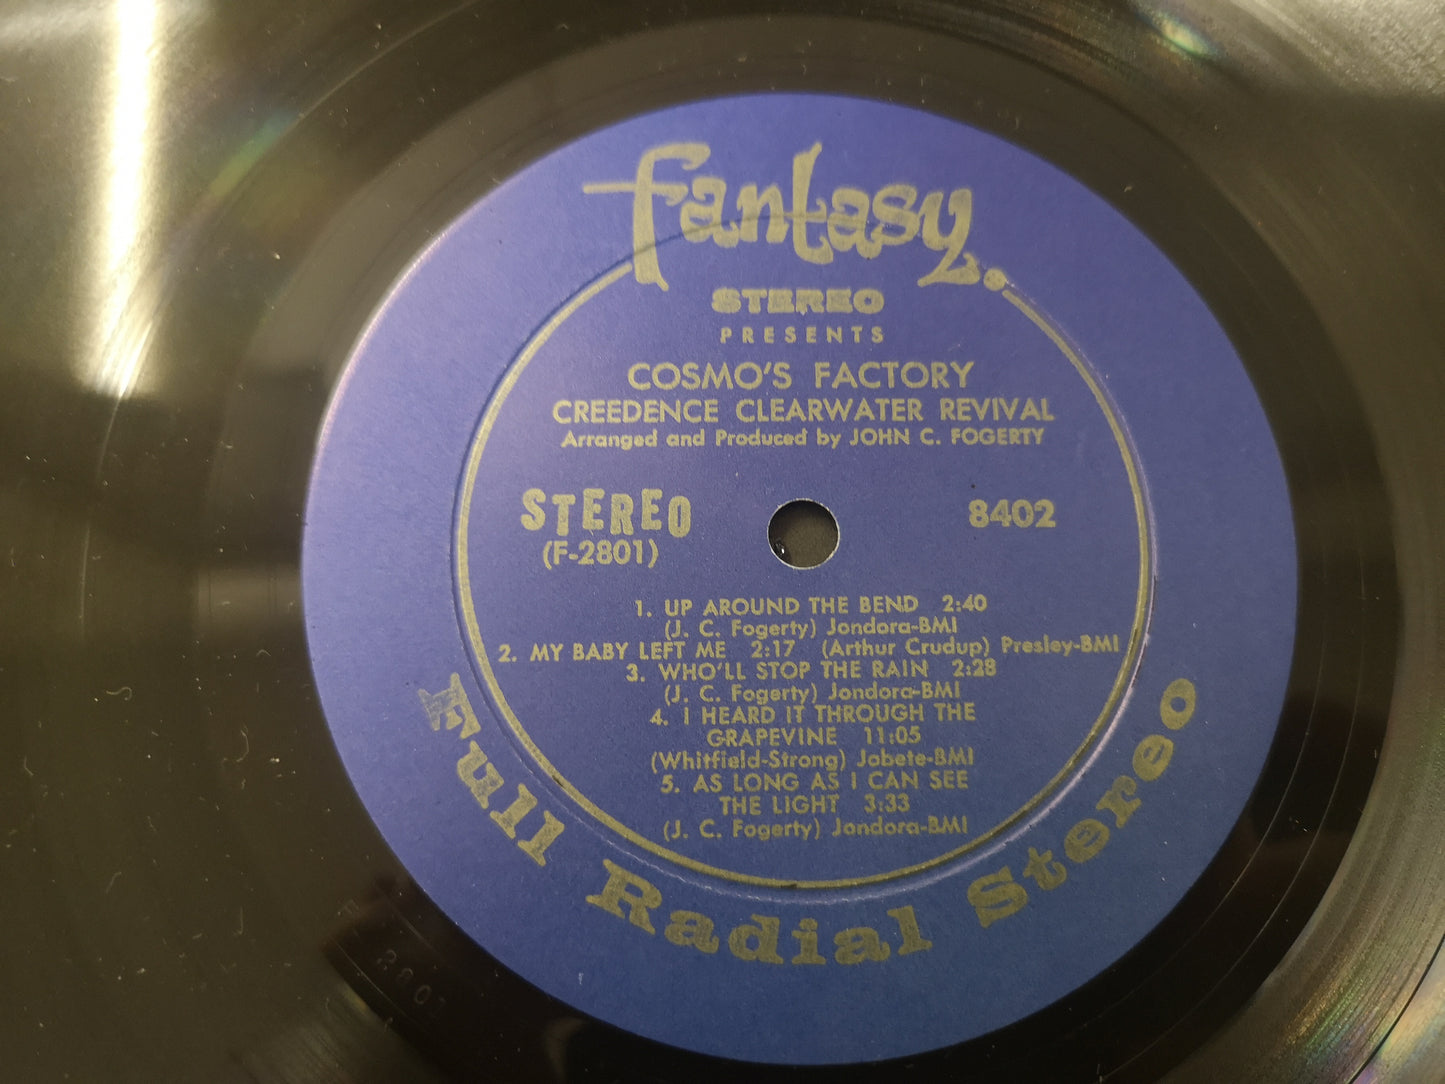 Creedence Clearwater Revival "Cosmo's Factory" Orig US 1970